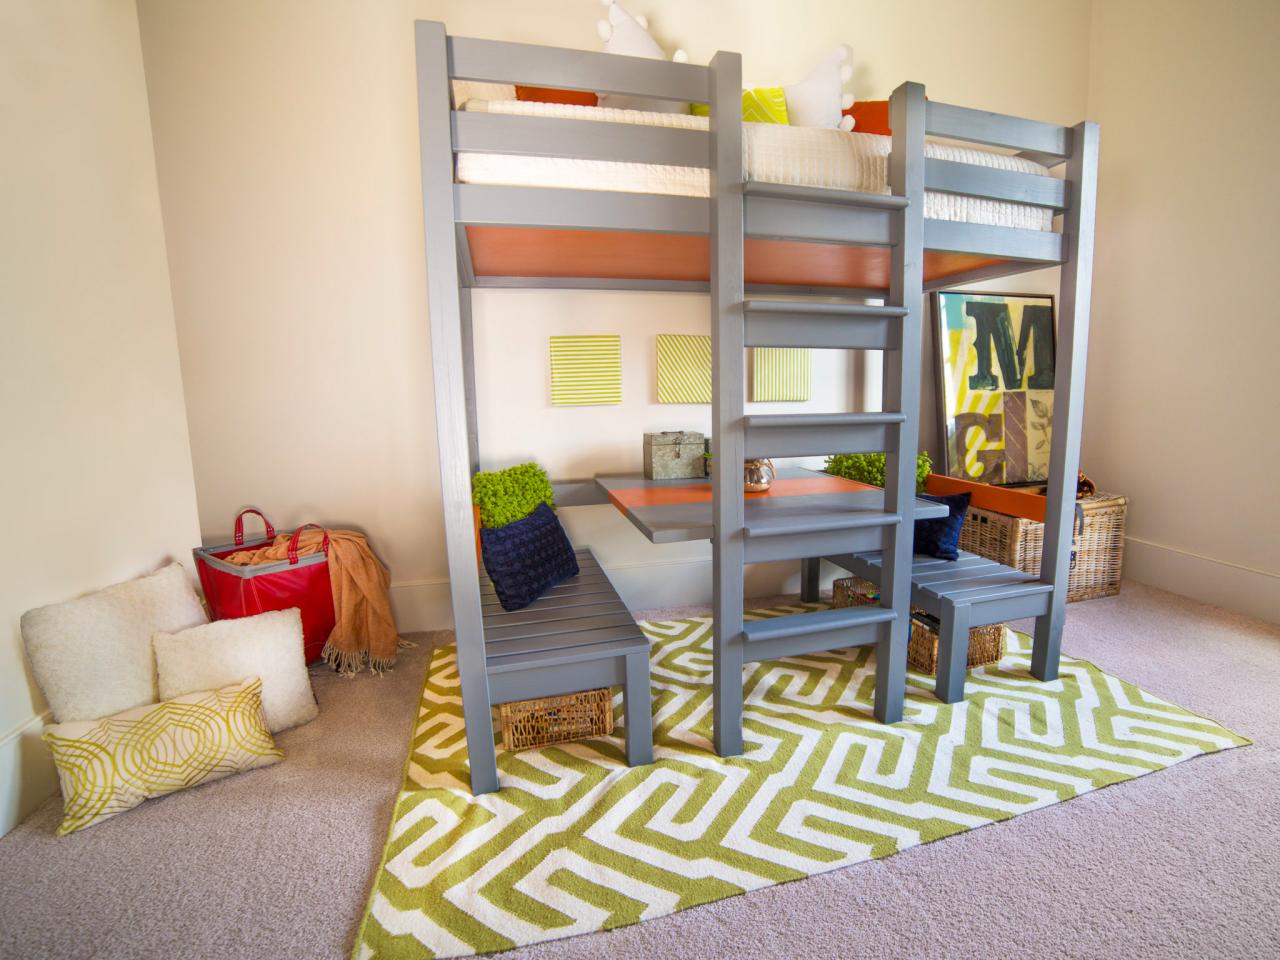 How To Build A Loft Bed With Built In, Underneath Loft Bed Ideas